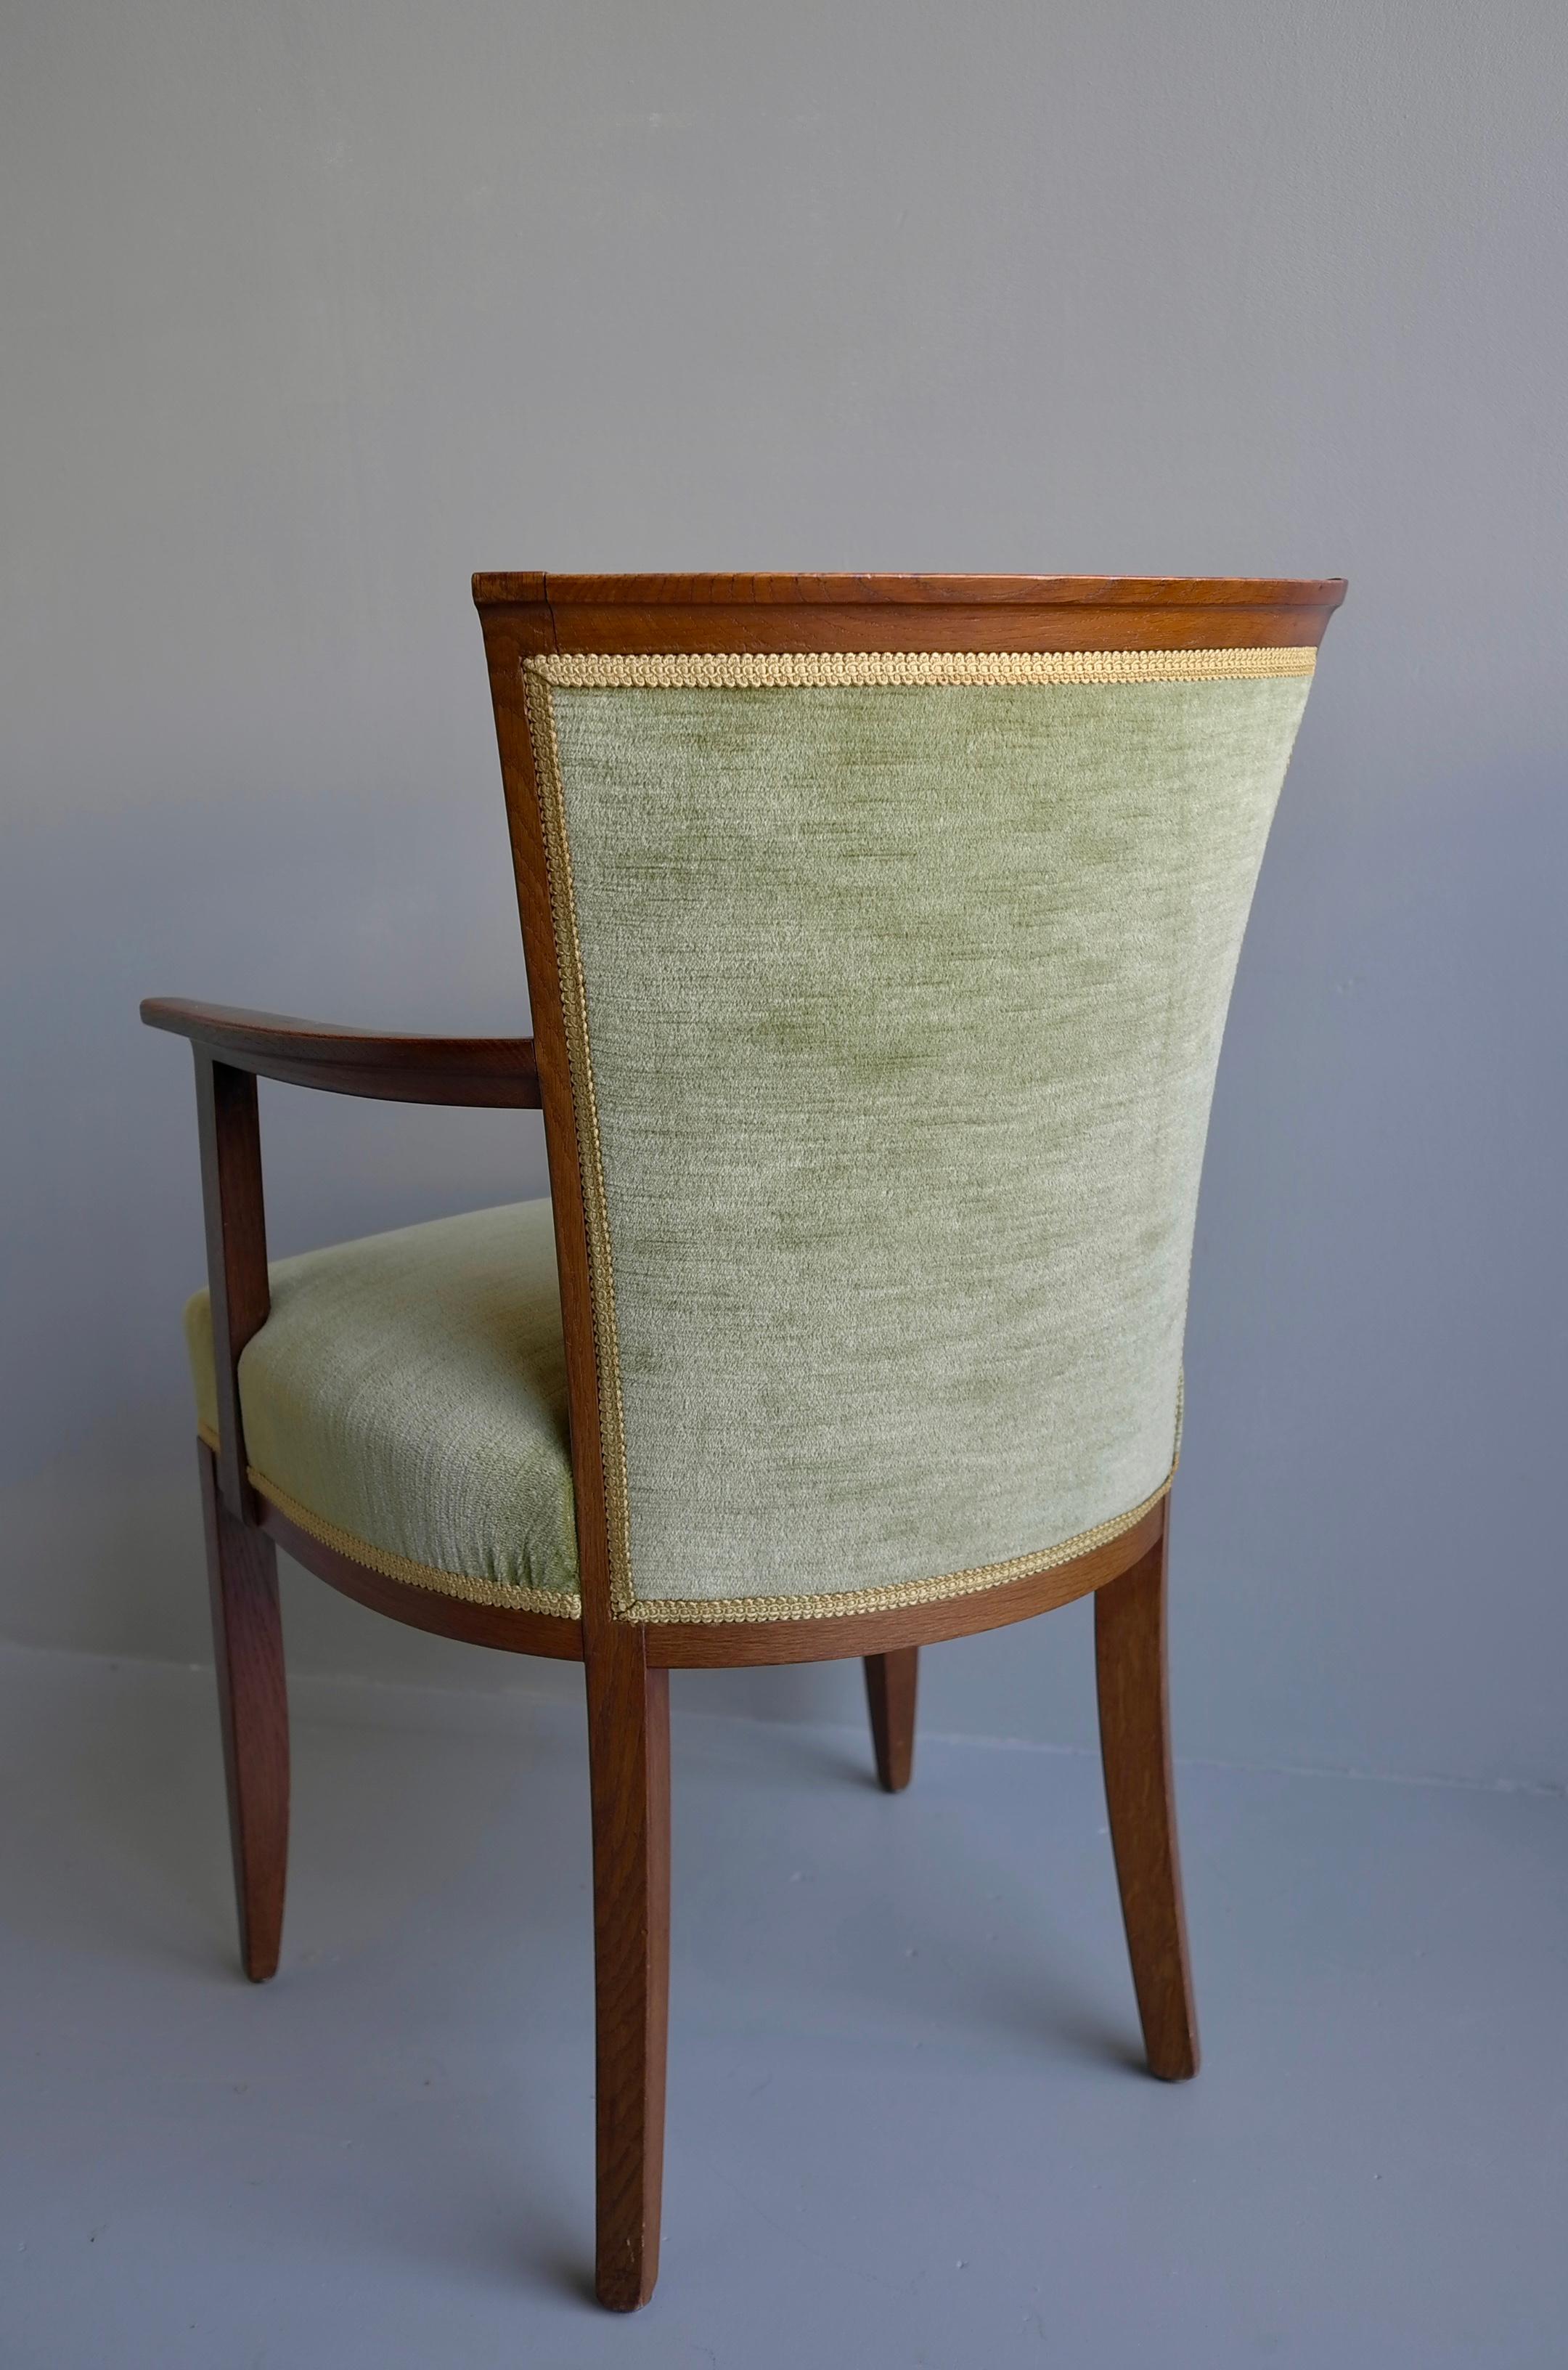 Mid-20th Century Art Deco Green Velvet Dining Room Chairs by H. Pander & Zonen Netherlands, 1930s For Sale